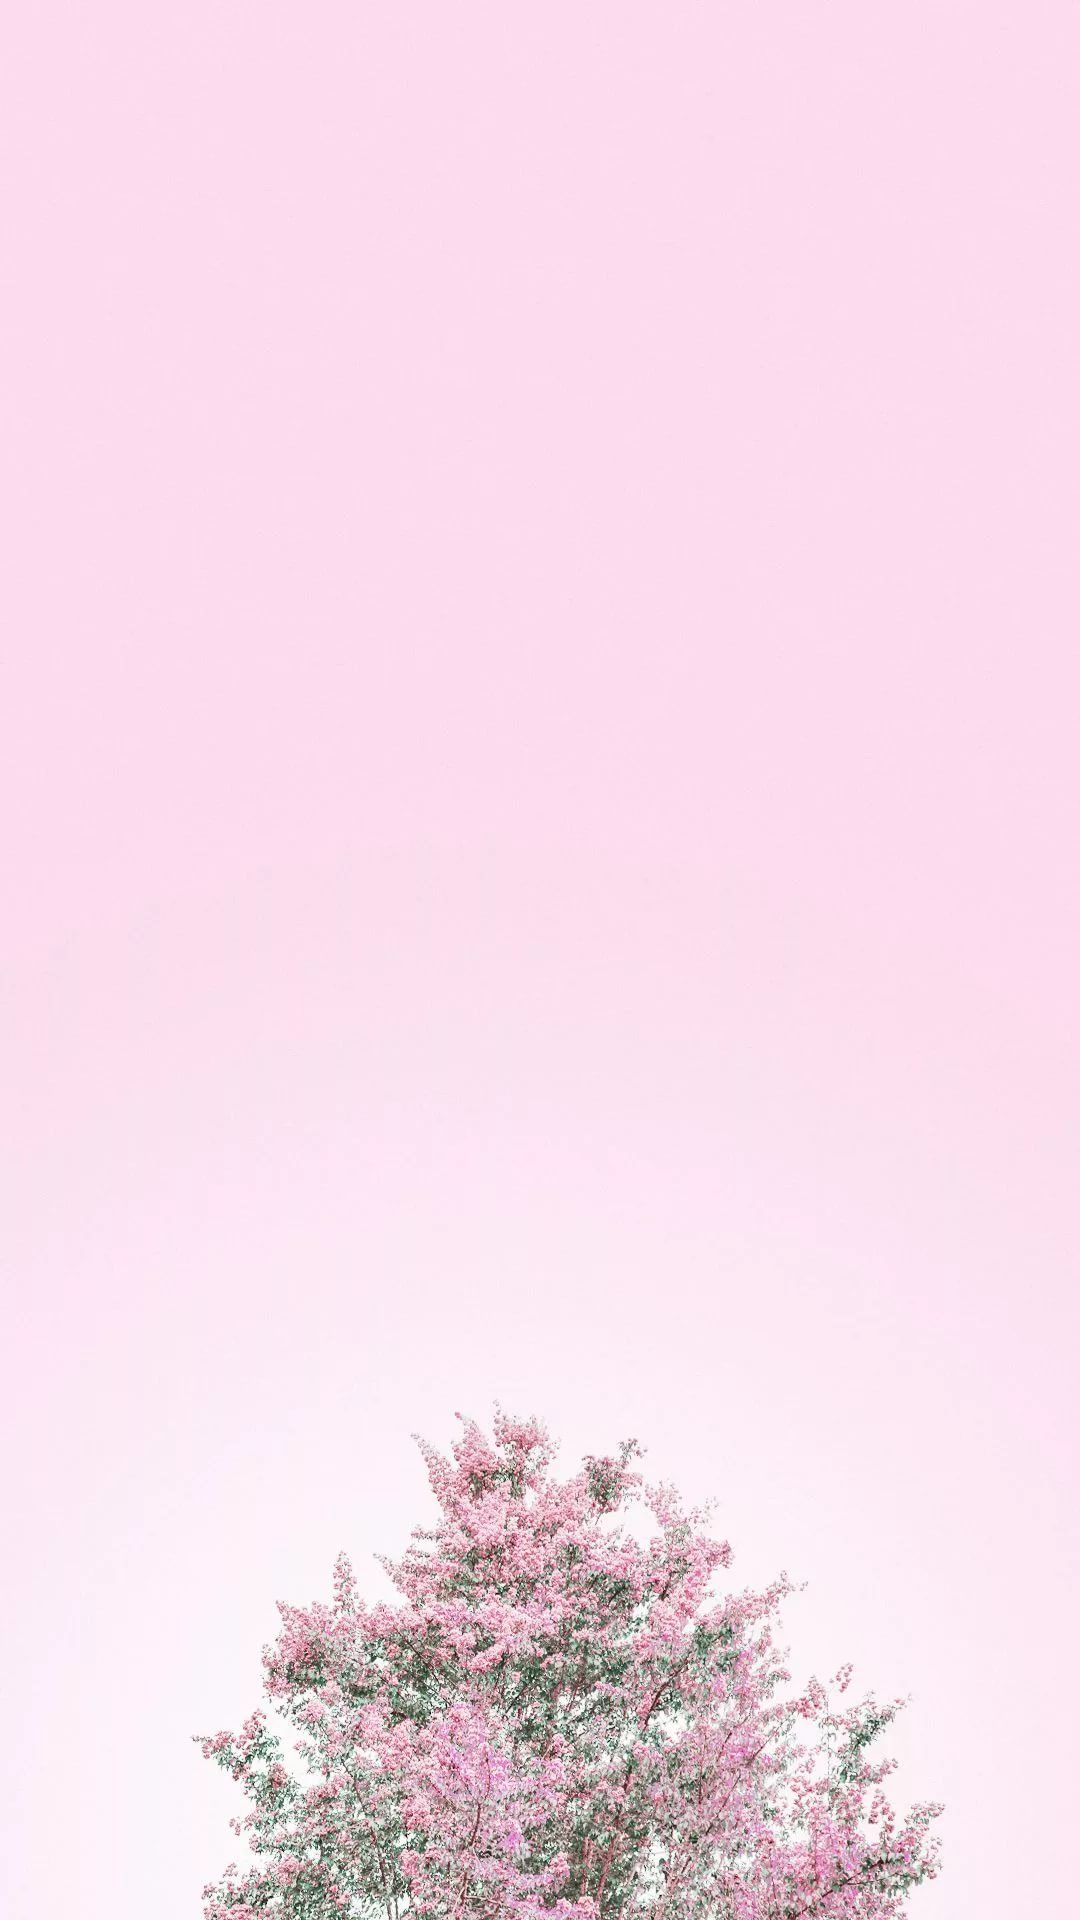 Solid Pink wallpaper for iPhone